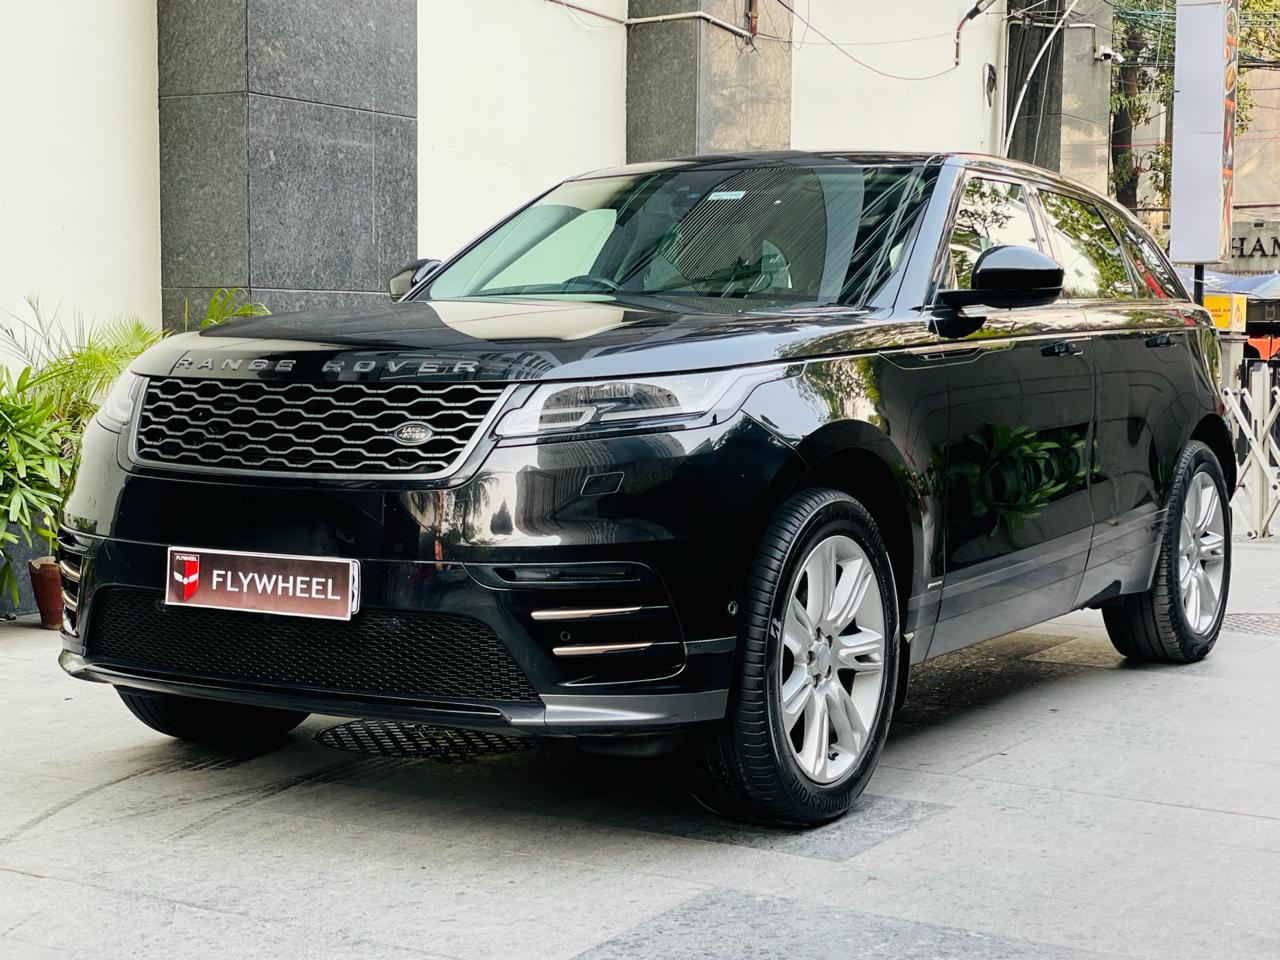 RANGE ROVER VELAR R-DY. S 2019: Luxury SUV Excellence